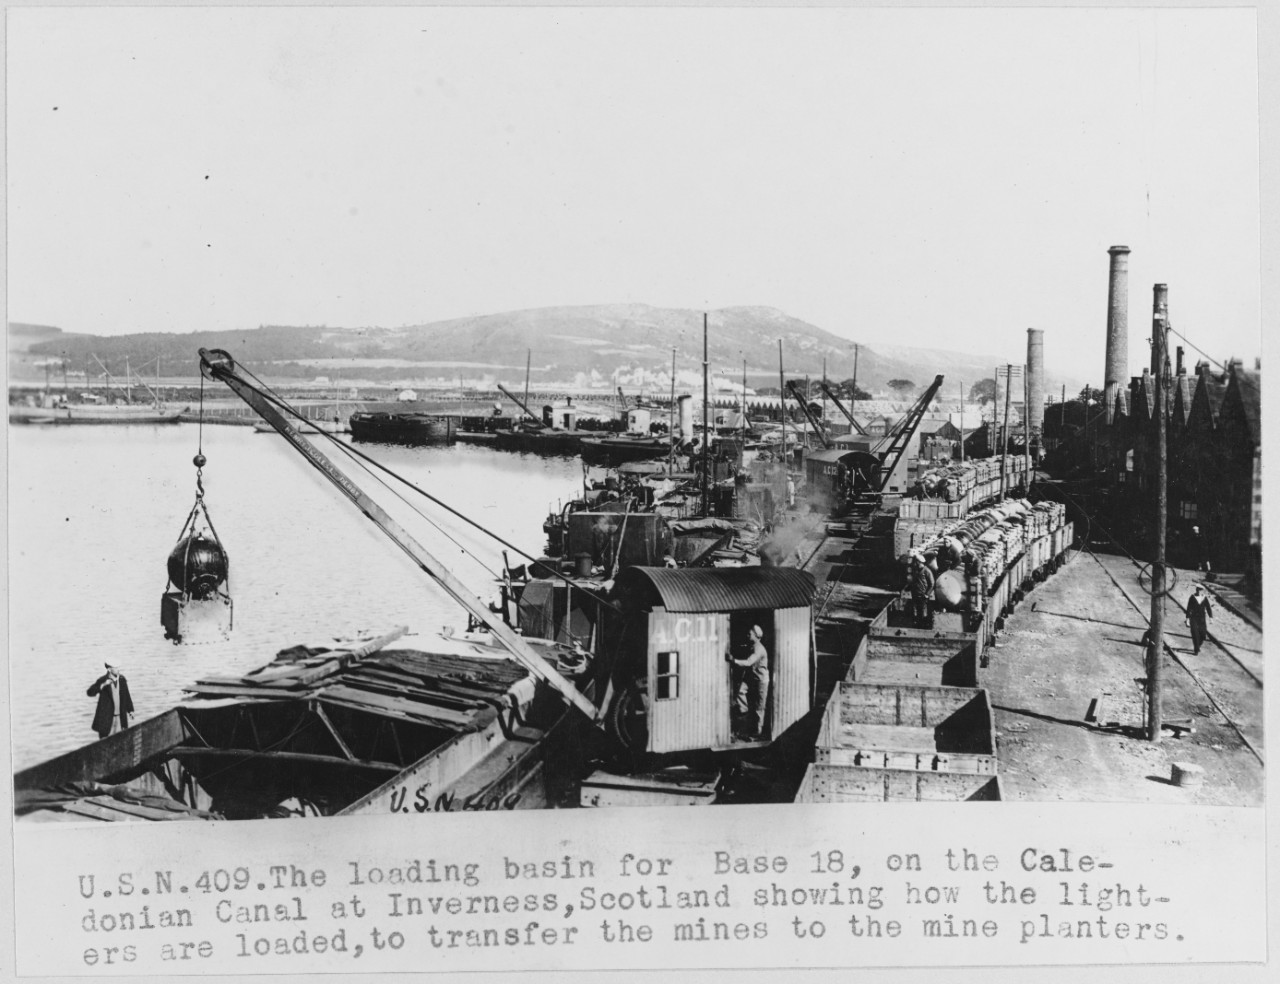 USN 409. The loading basin for Base 18, on the Caledonian Canal at Inverness, Scotland